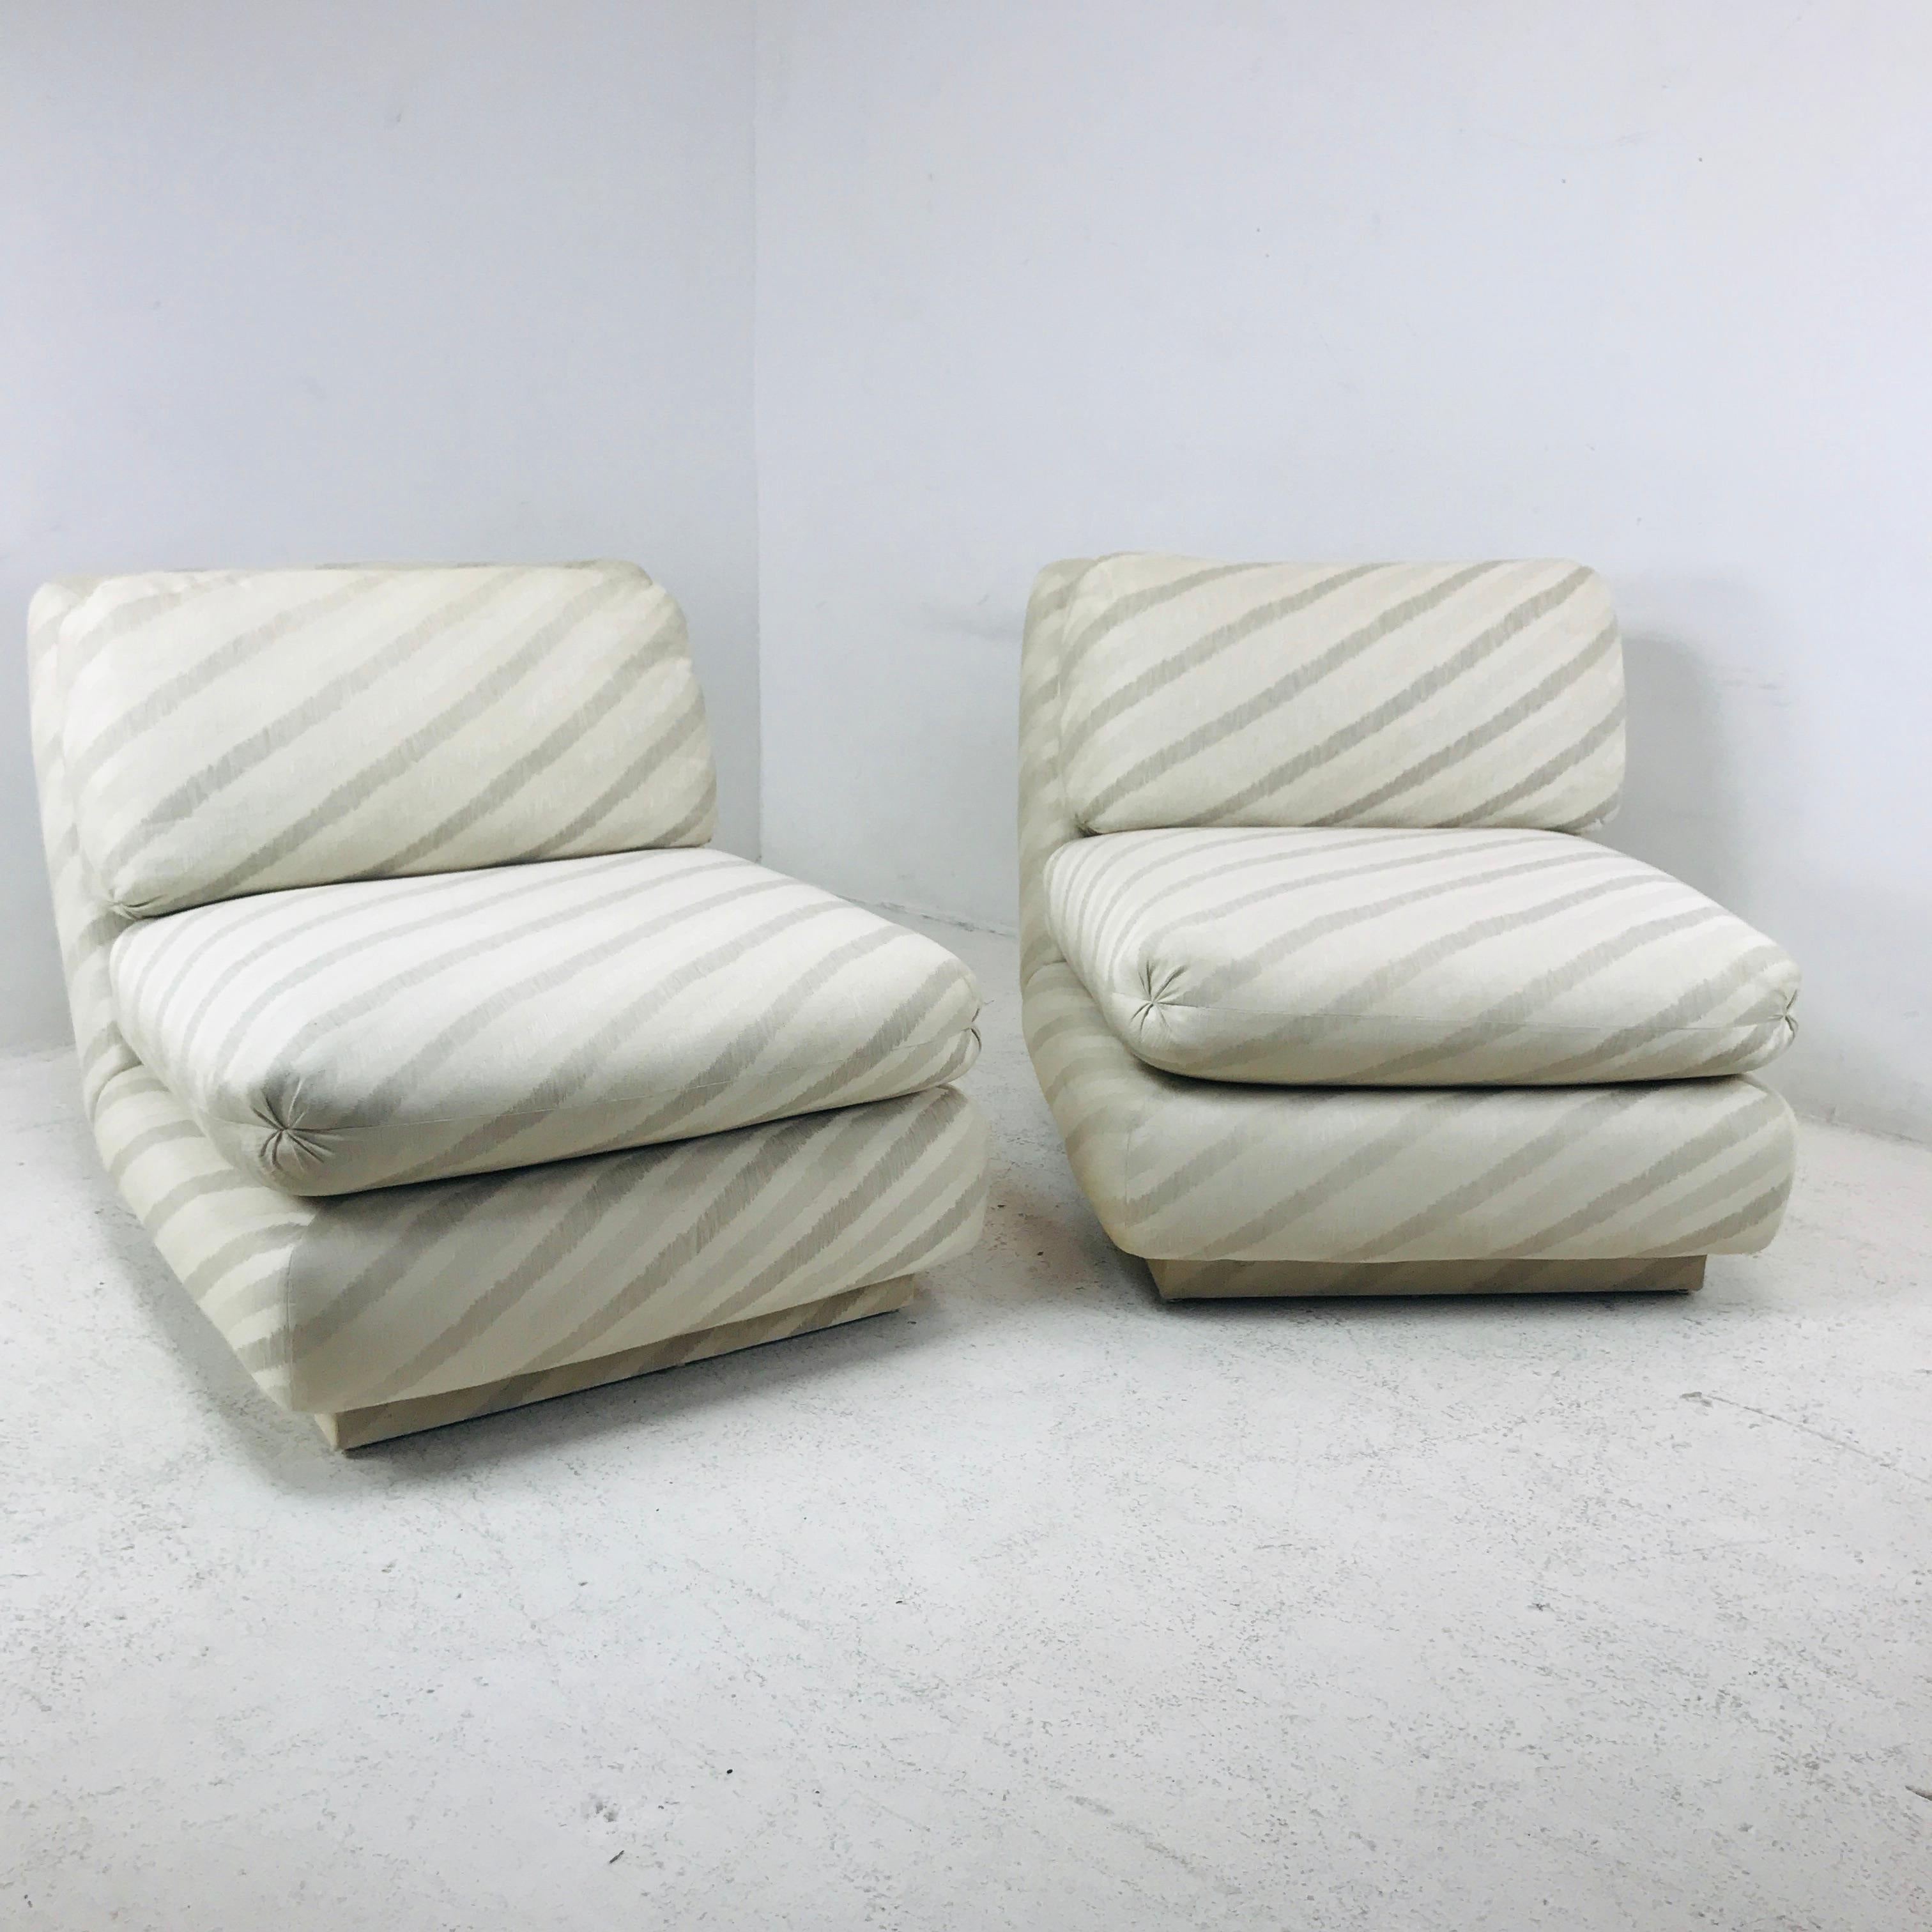 Lovely, upscale pair of 1980s slipper chairs designed by Marge Carson, California. Great back slant design. Original tags.